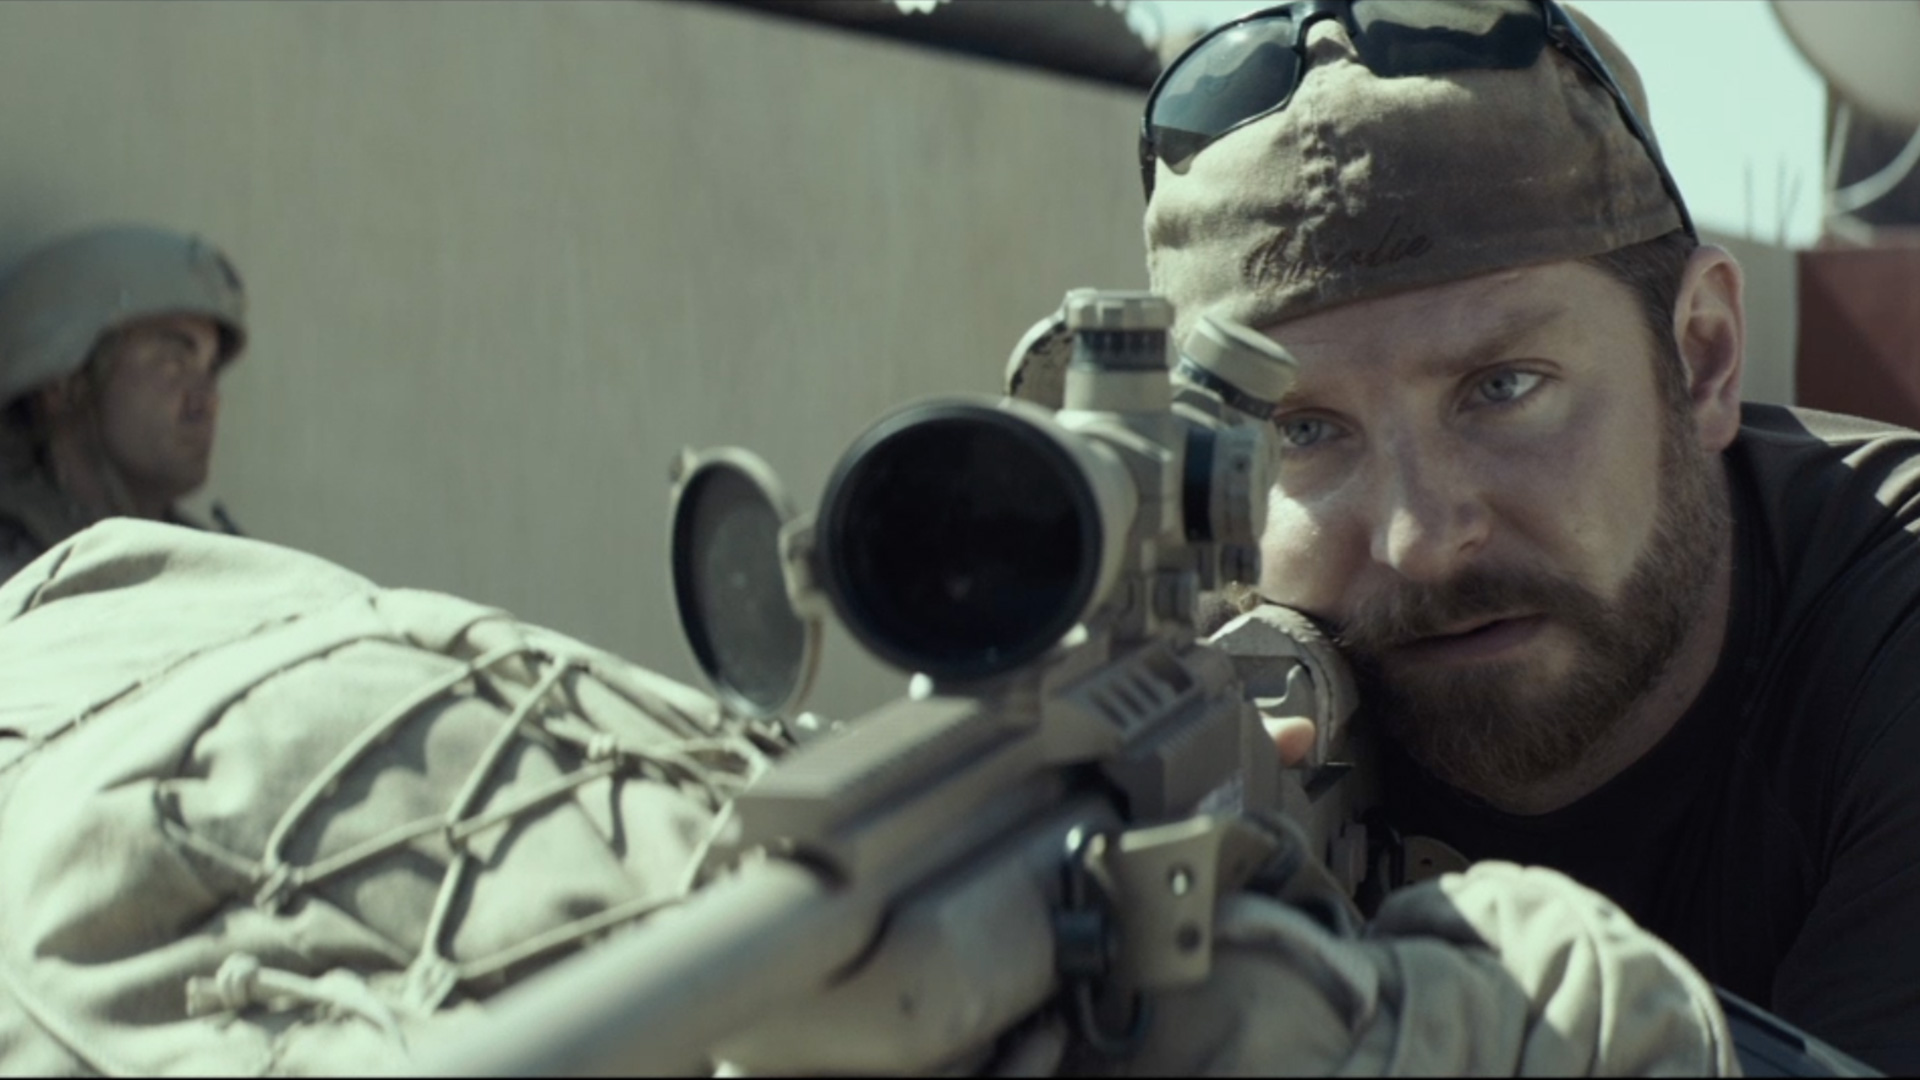 How Clint Eastwood's 'American Sniper' stoked the American culture wars -  The Washington Post